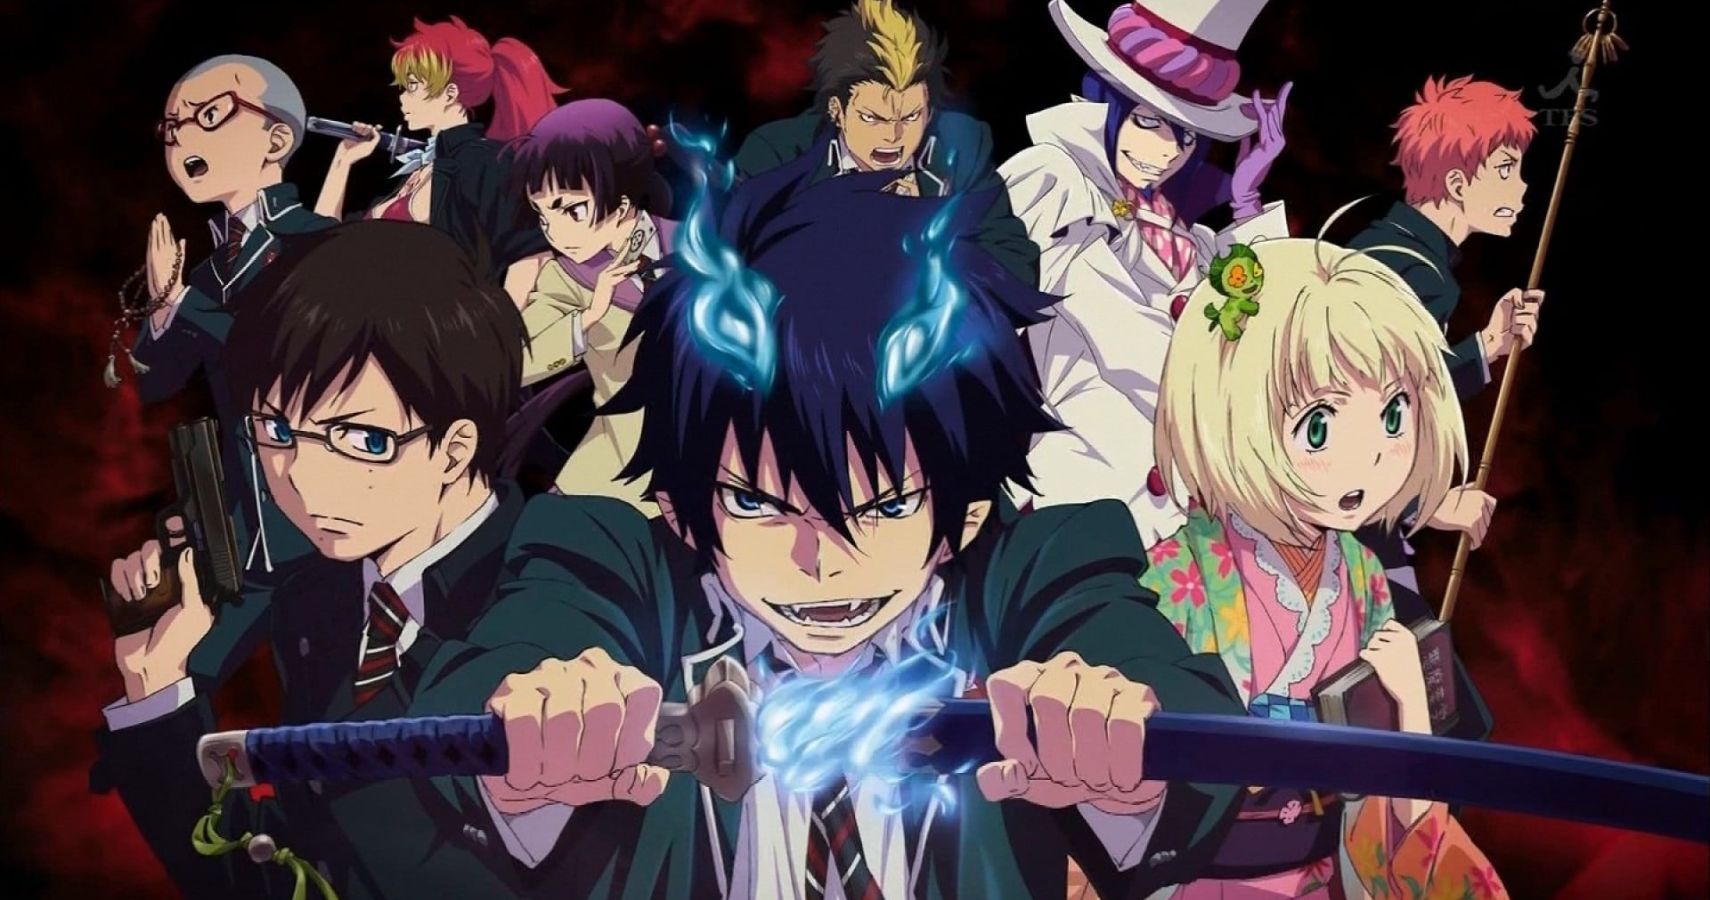 The main cast of the Blue Exorcist anime, with main character Rin Okumura unsheathing a sword.